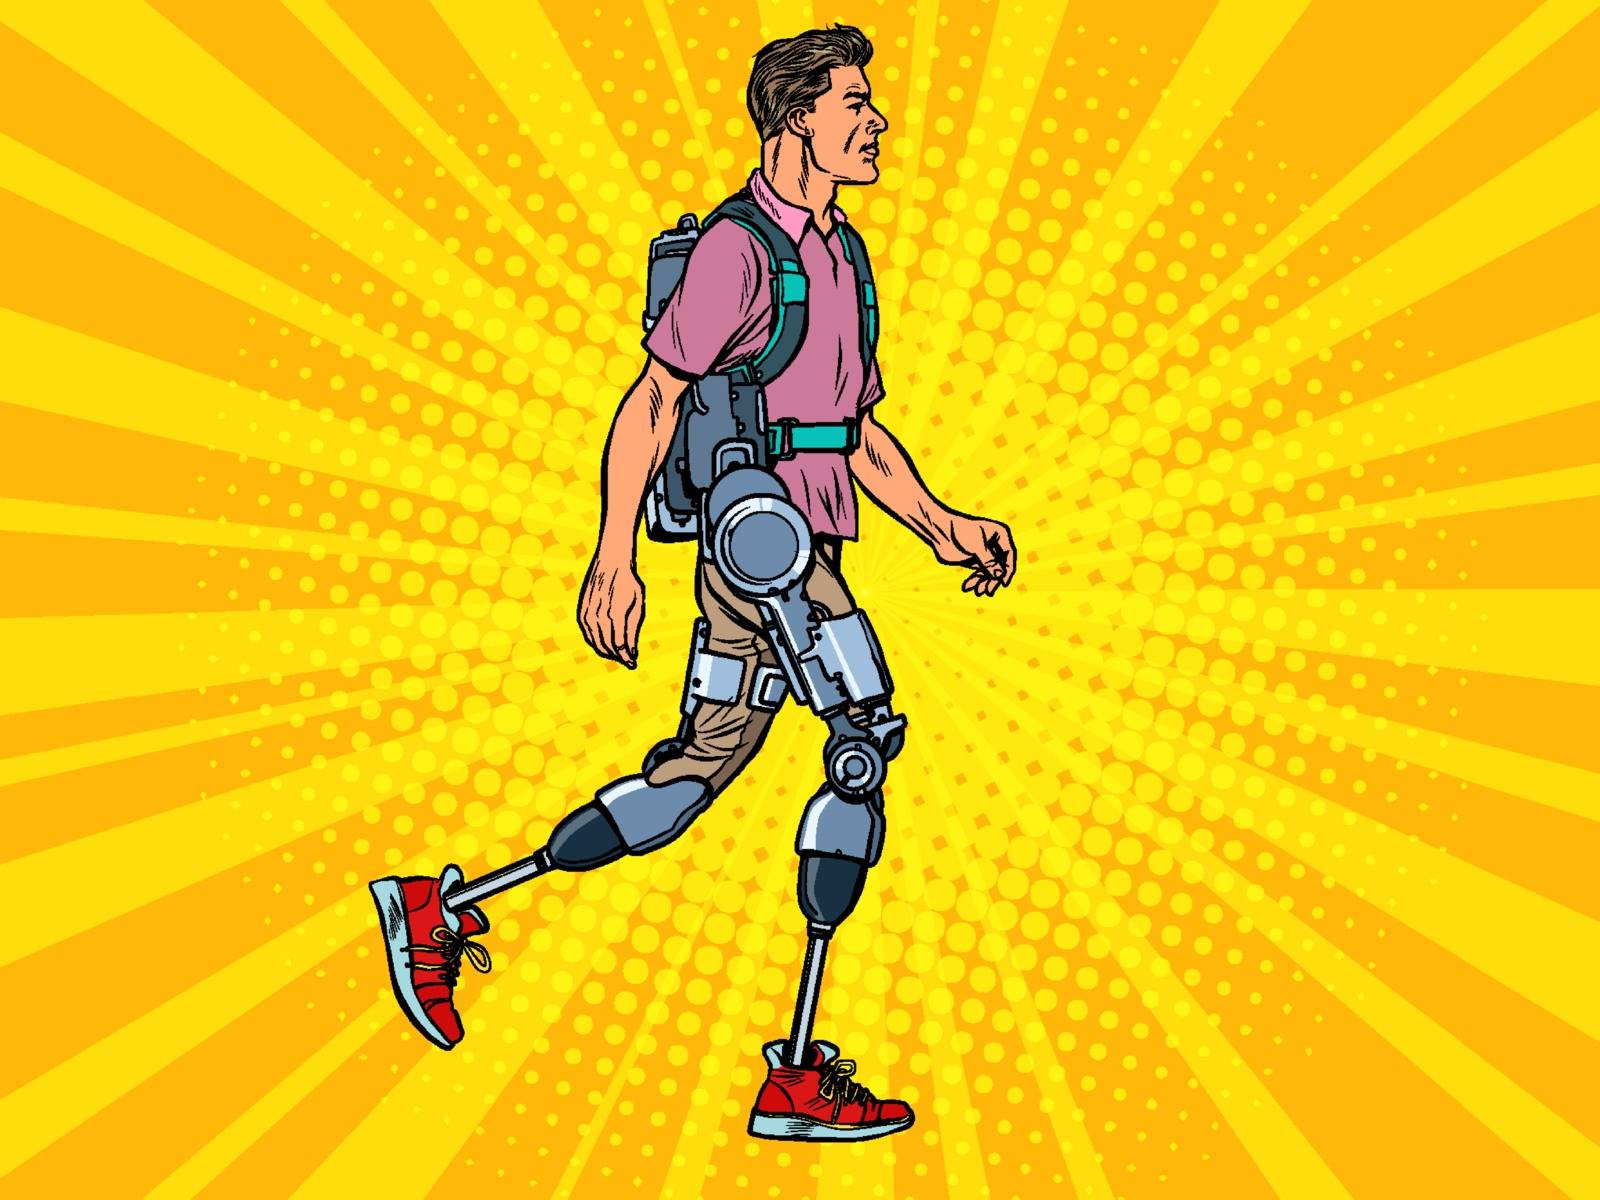 exoskeleton for the disabled. A man legless veteran walks. rehabilitation treatment recovery. science and technology. pop art retro vector illustration kitsch vintage drawing 50s 60s